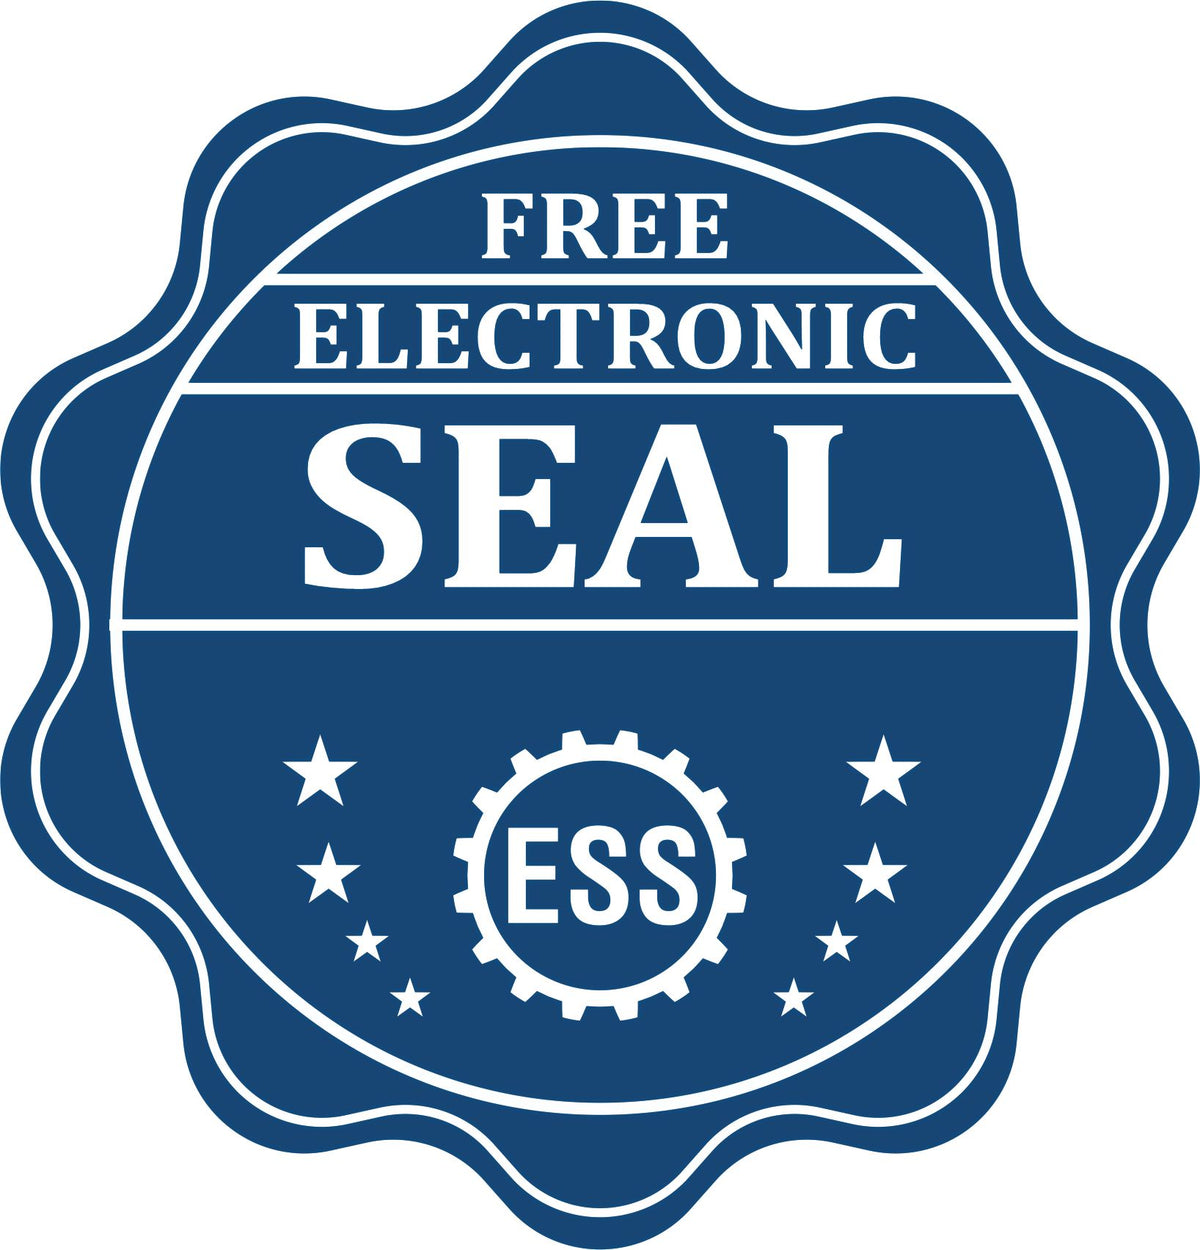 A badge showing a free electronic seal for the Self-Inking Alabama Landscape Architect Stamp with stars and the ESS gear on the emblem.